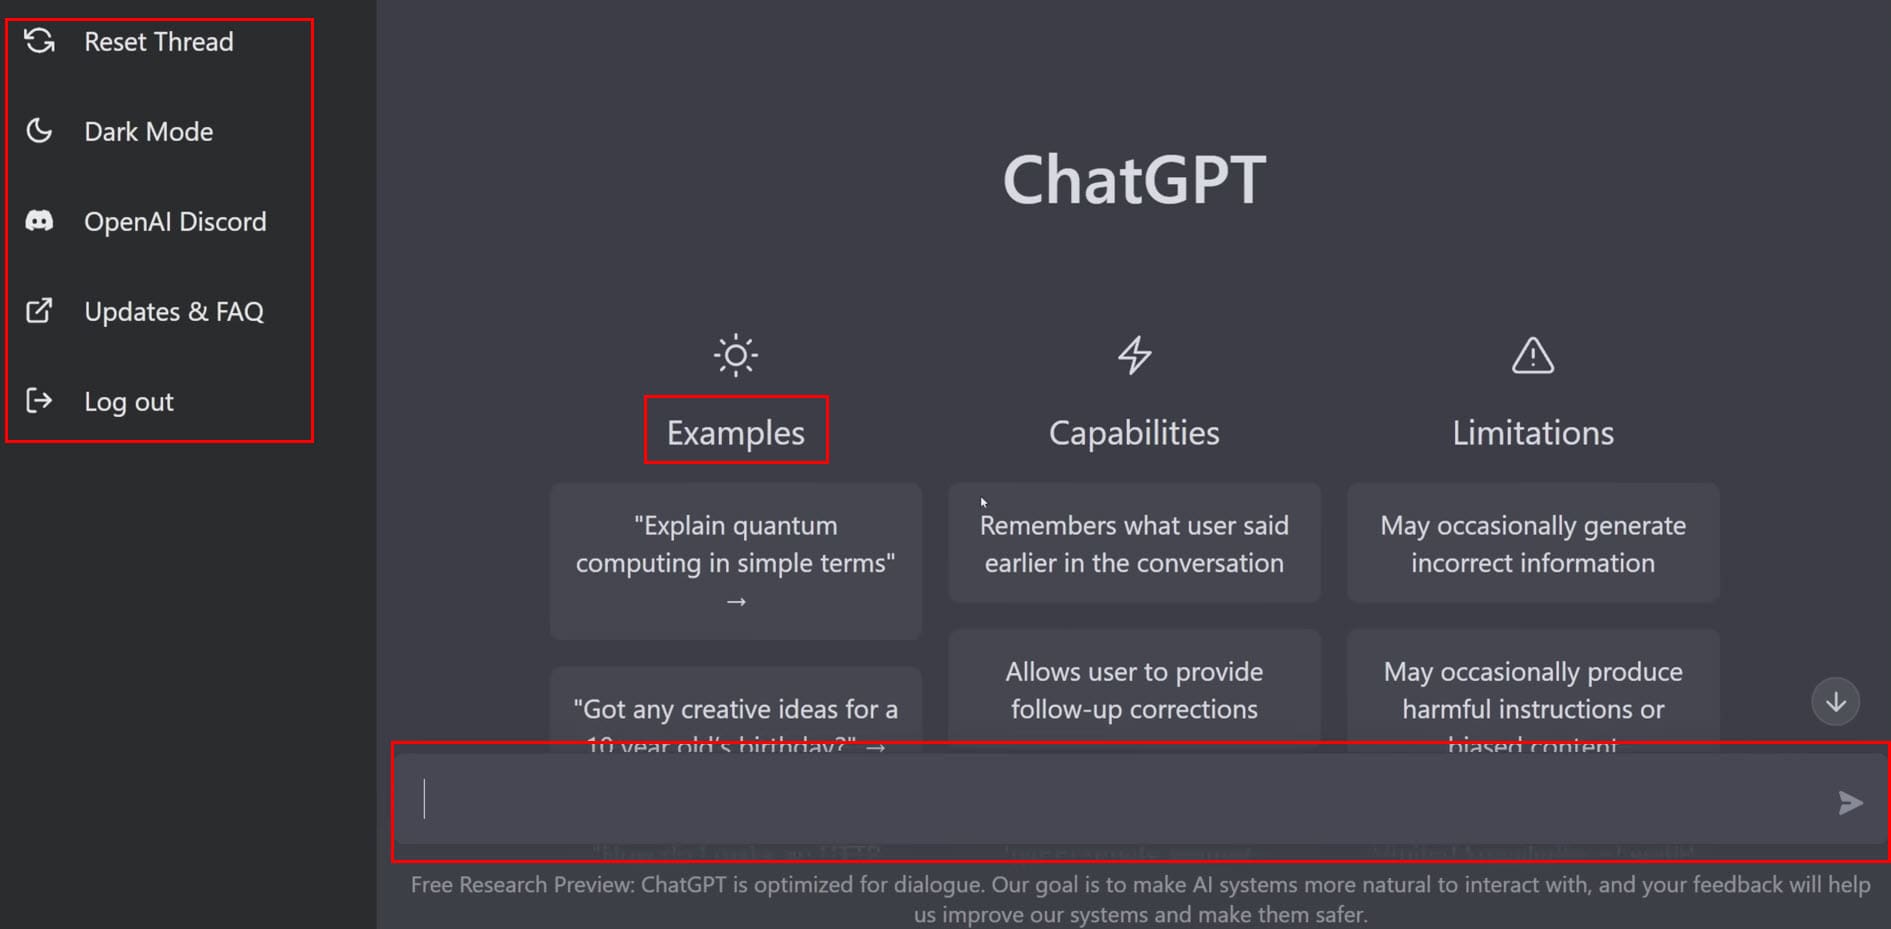 How to navigate the ChatGPT app